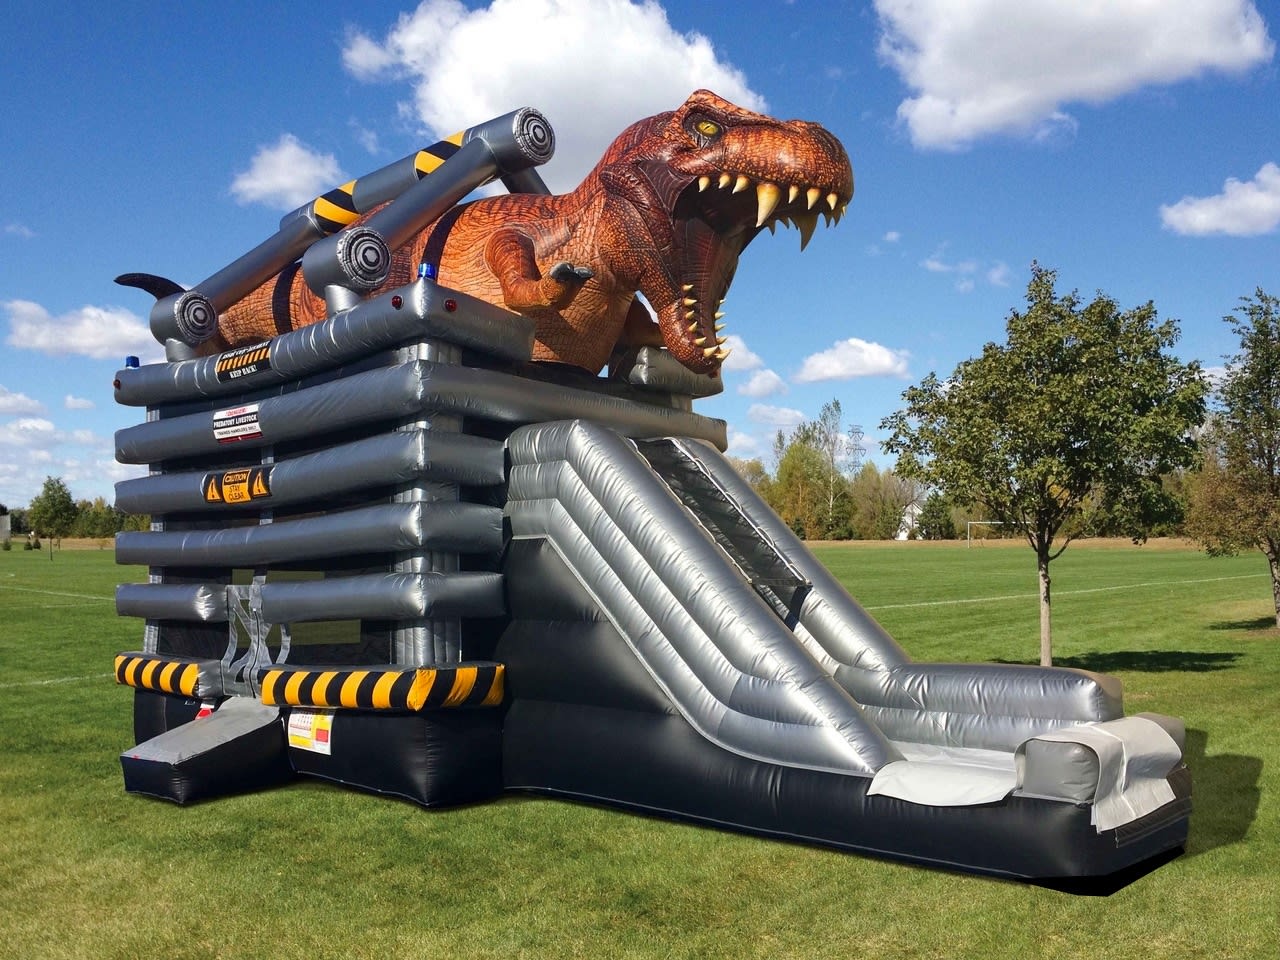 Dino World Slide/Bouncer/Obstacle Course Combo Inflatable